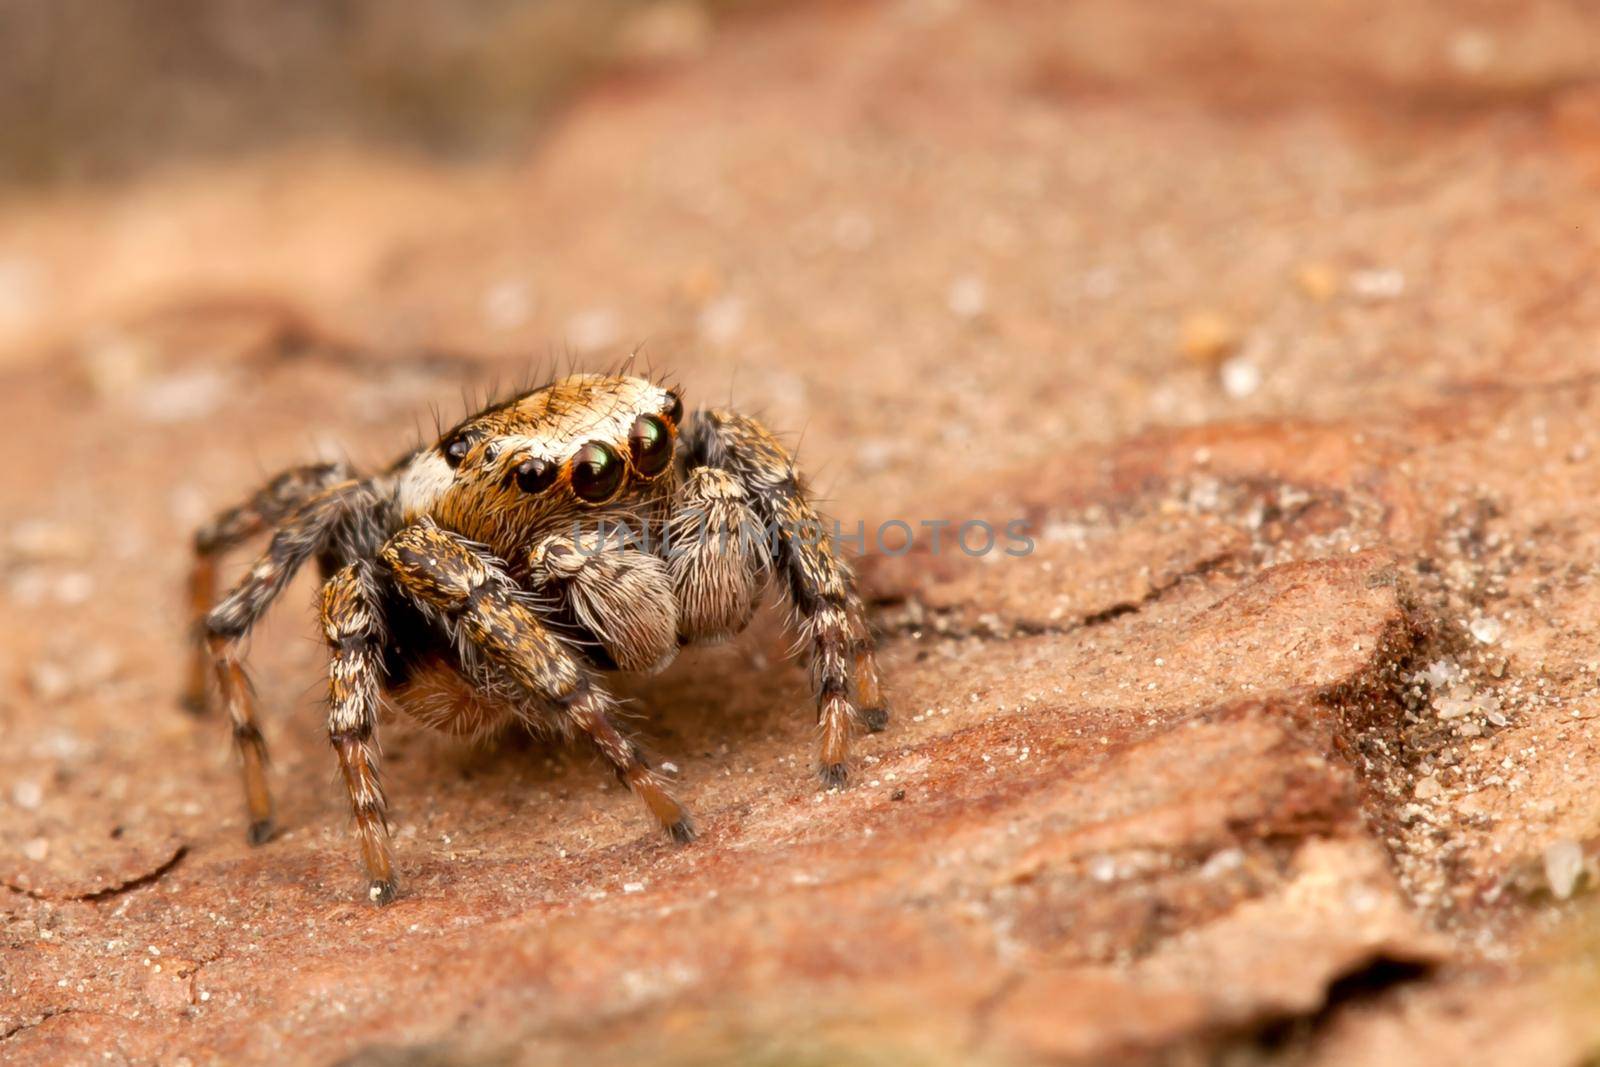 Jumping spider on the tree bark by Lincikas